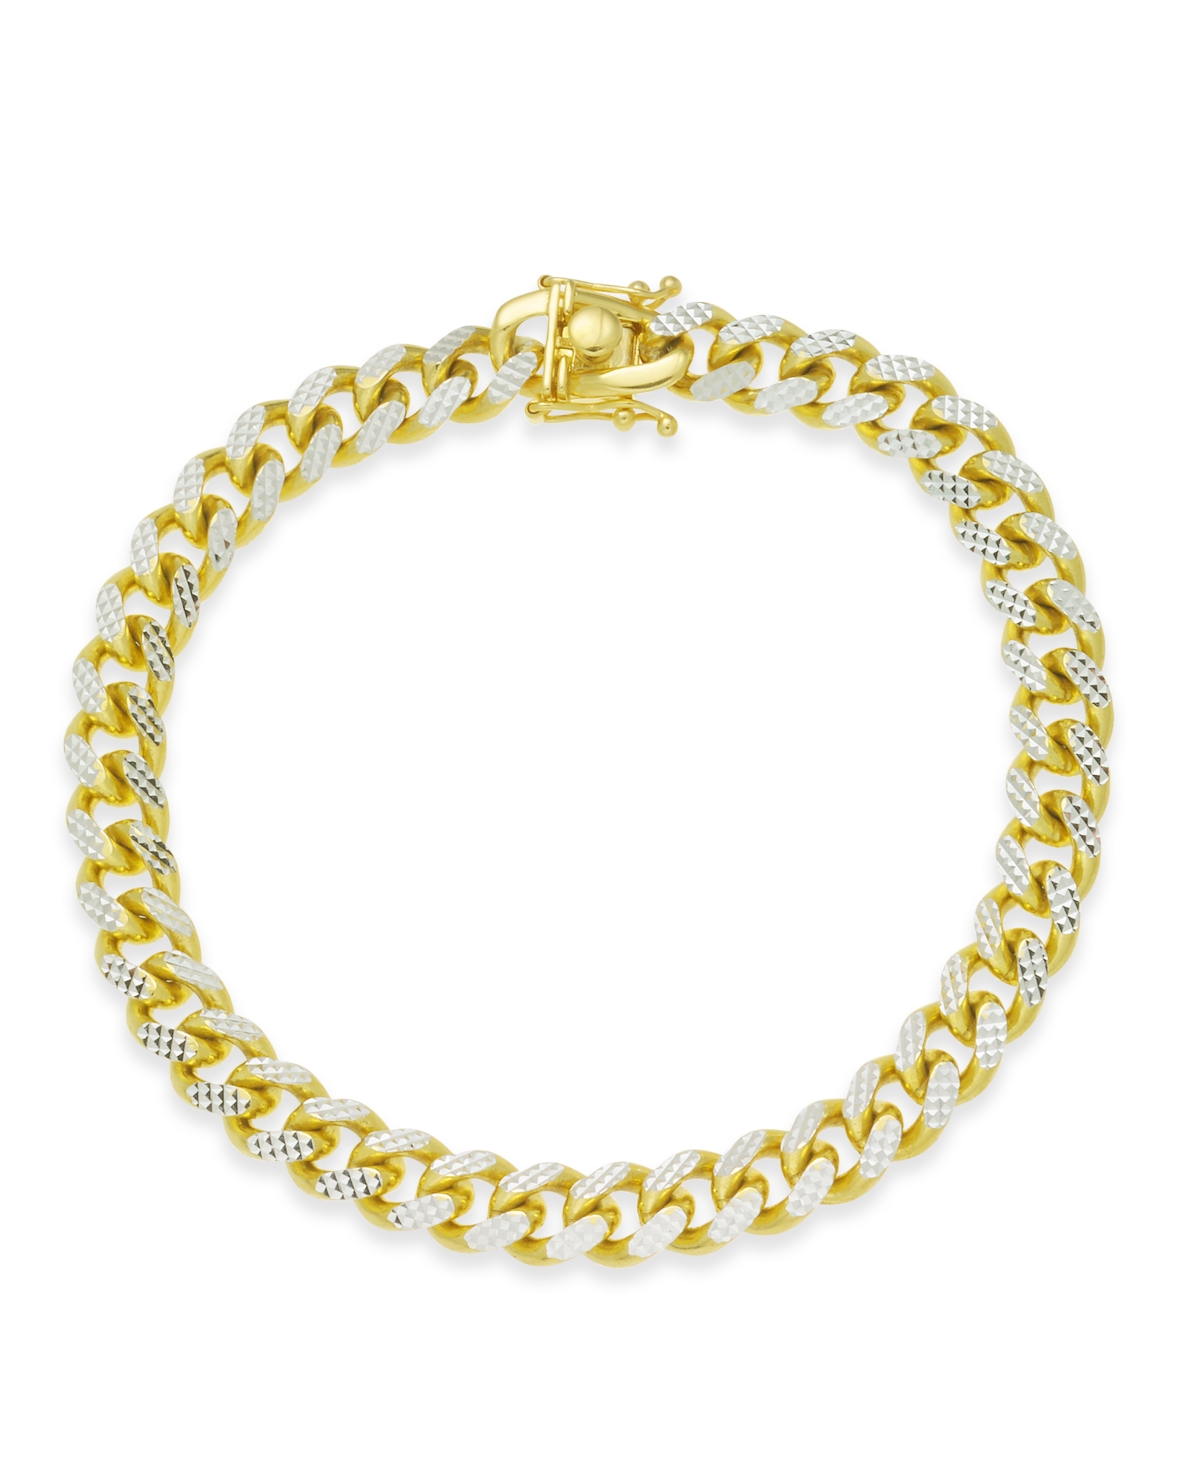 Men's Two-Tone Cuban Link Chain Bracelet in 14k Gold-Plated Sterling Silver and Sterling Silver - Gold